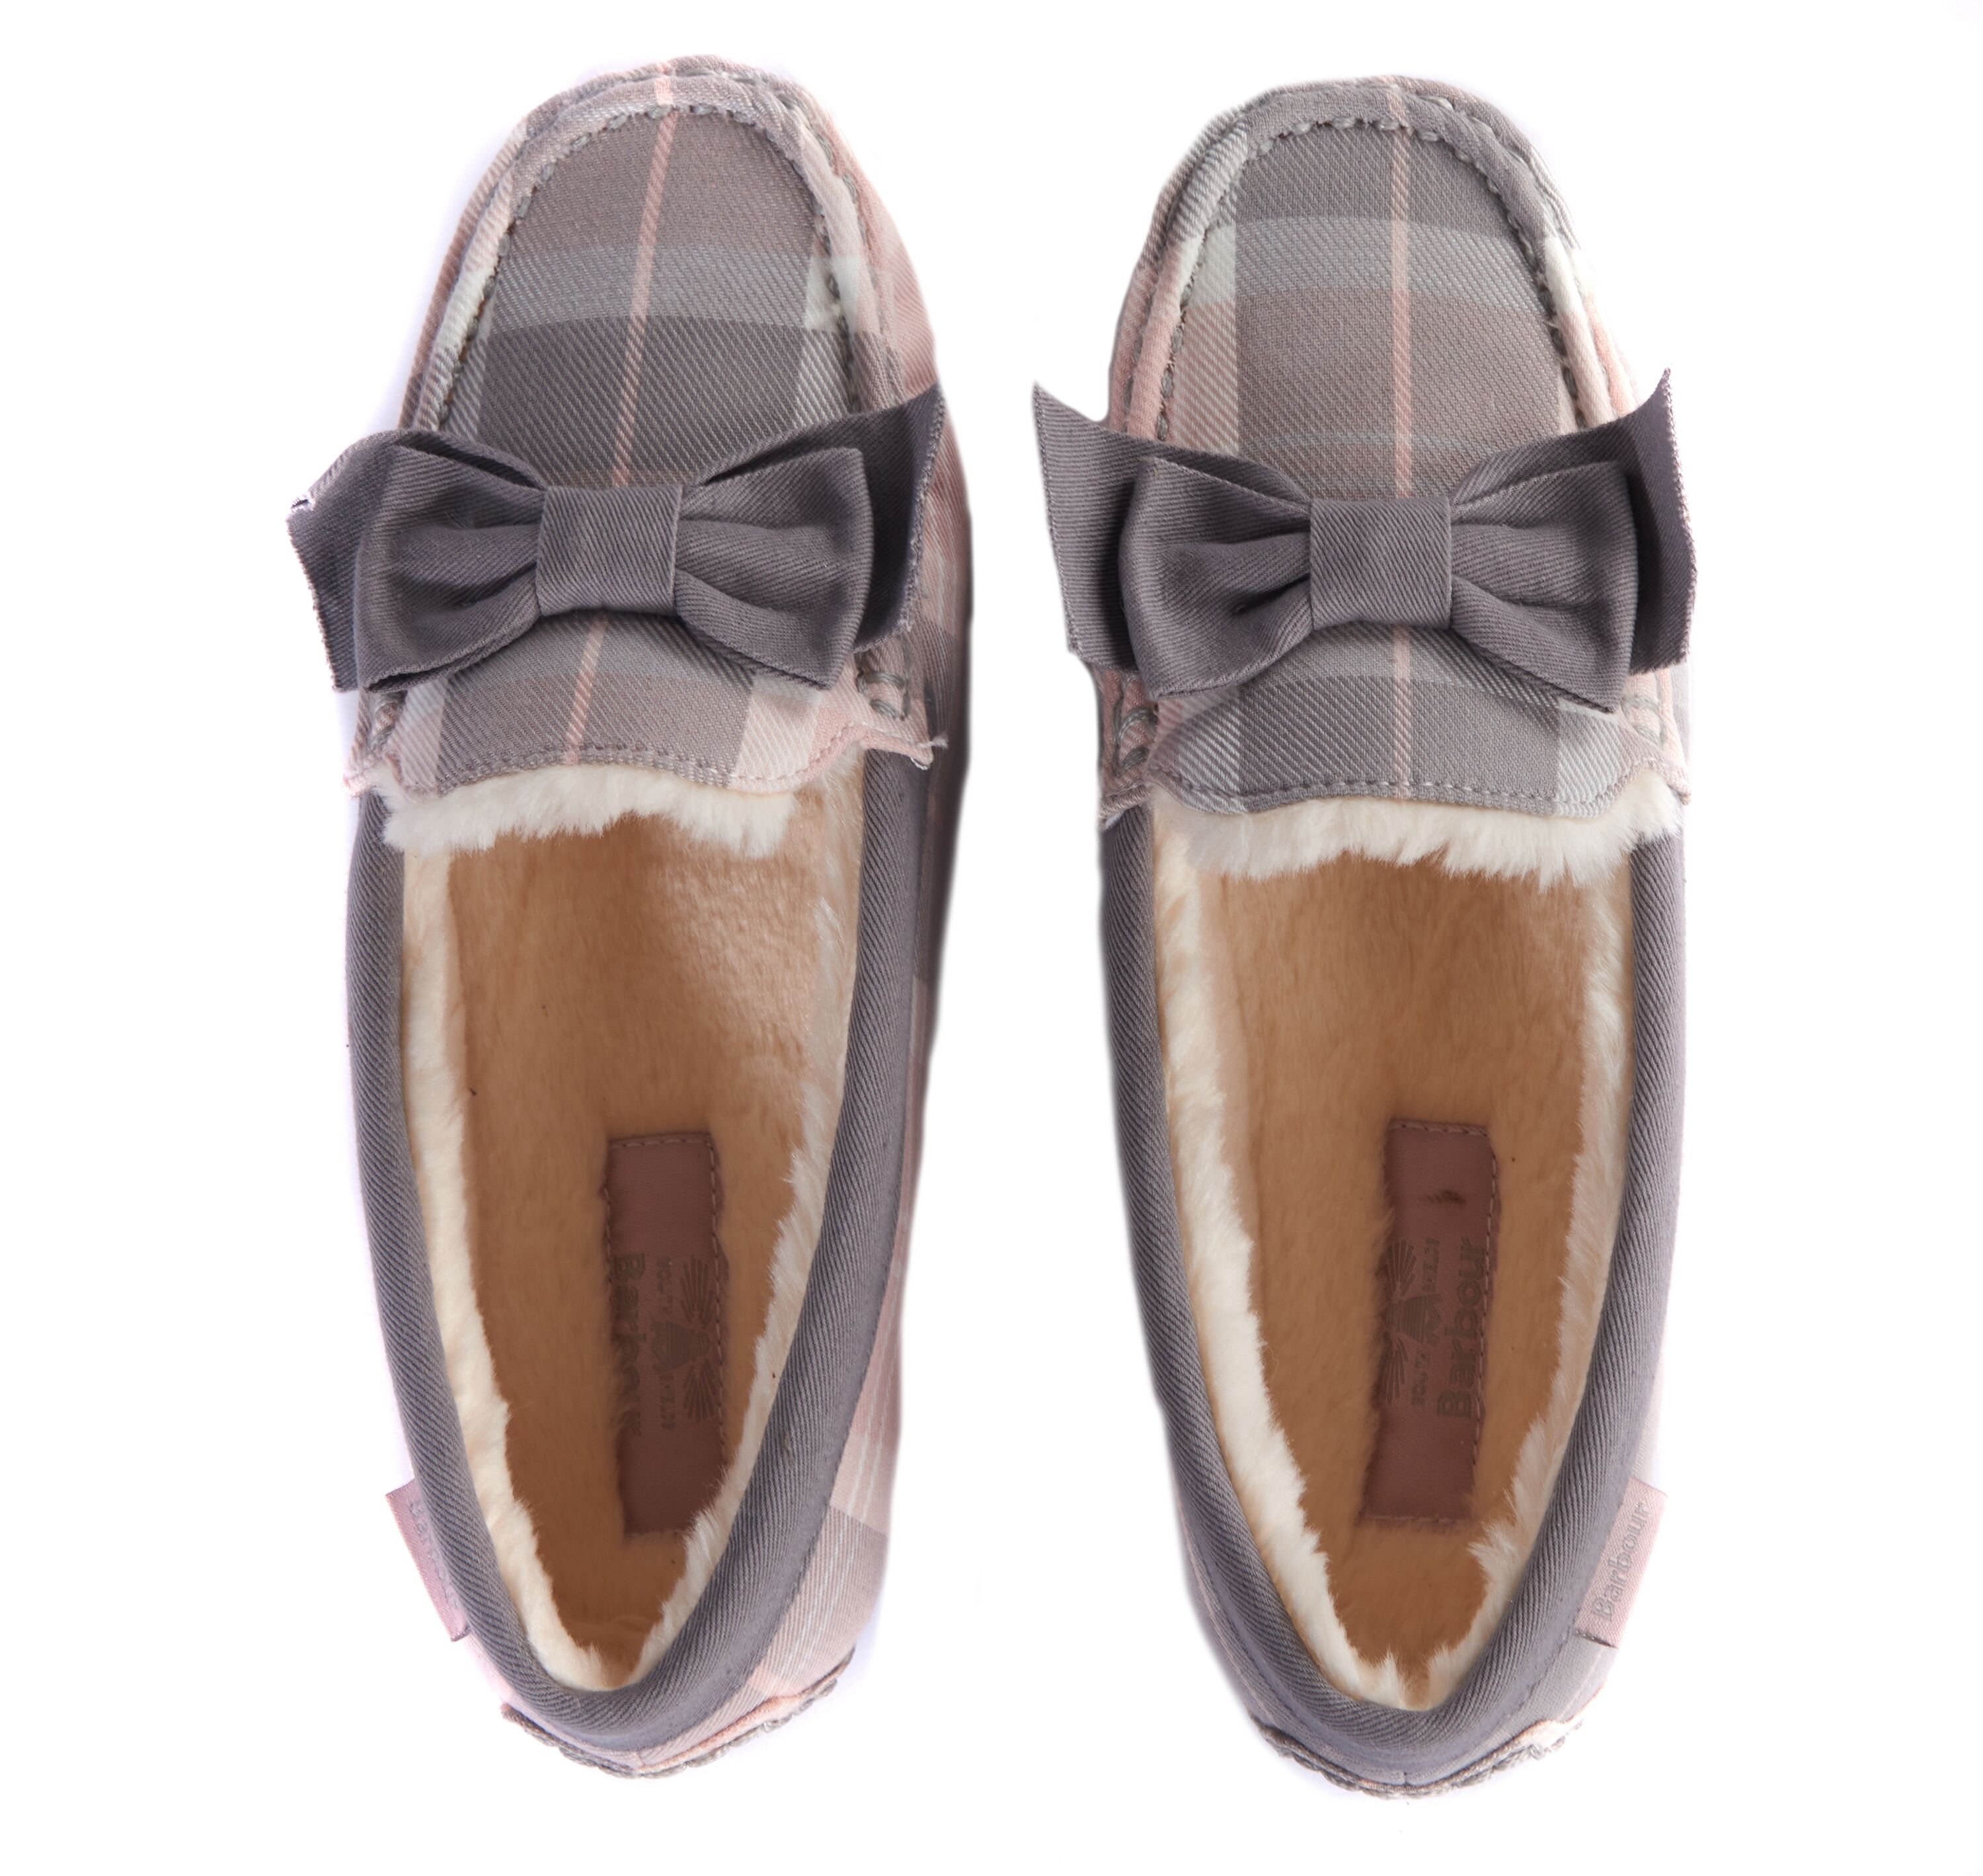 barbour womens slippers uk